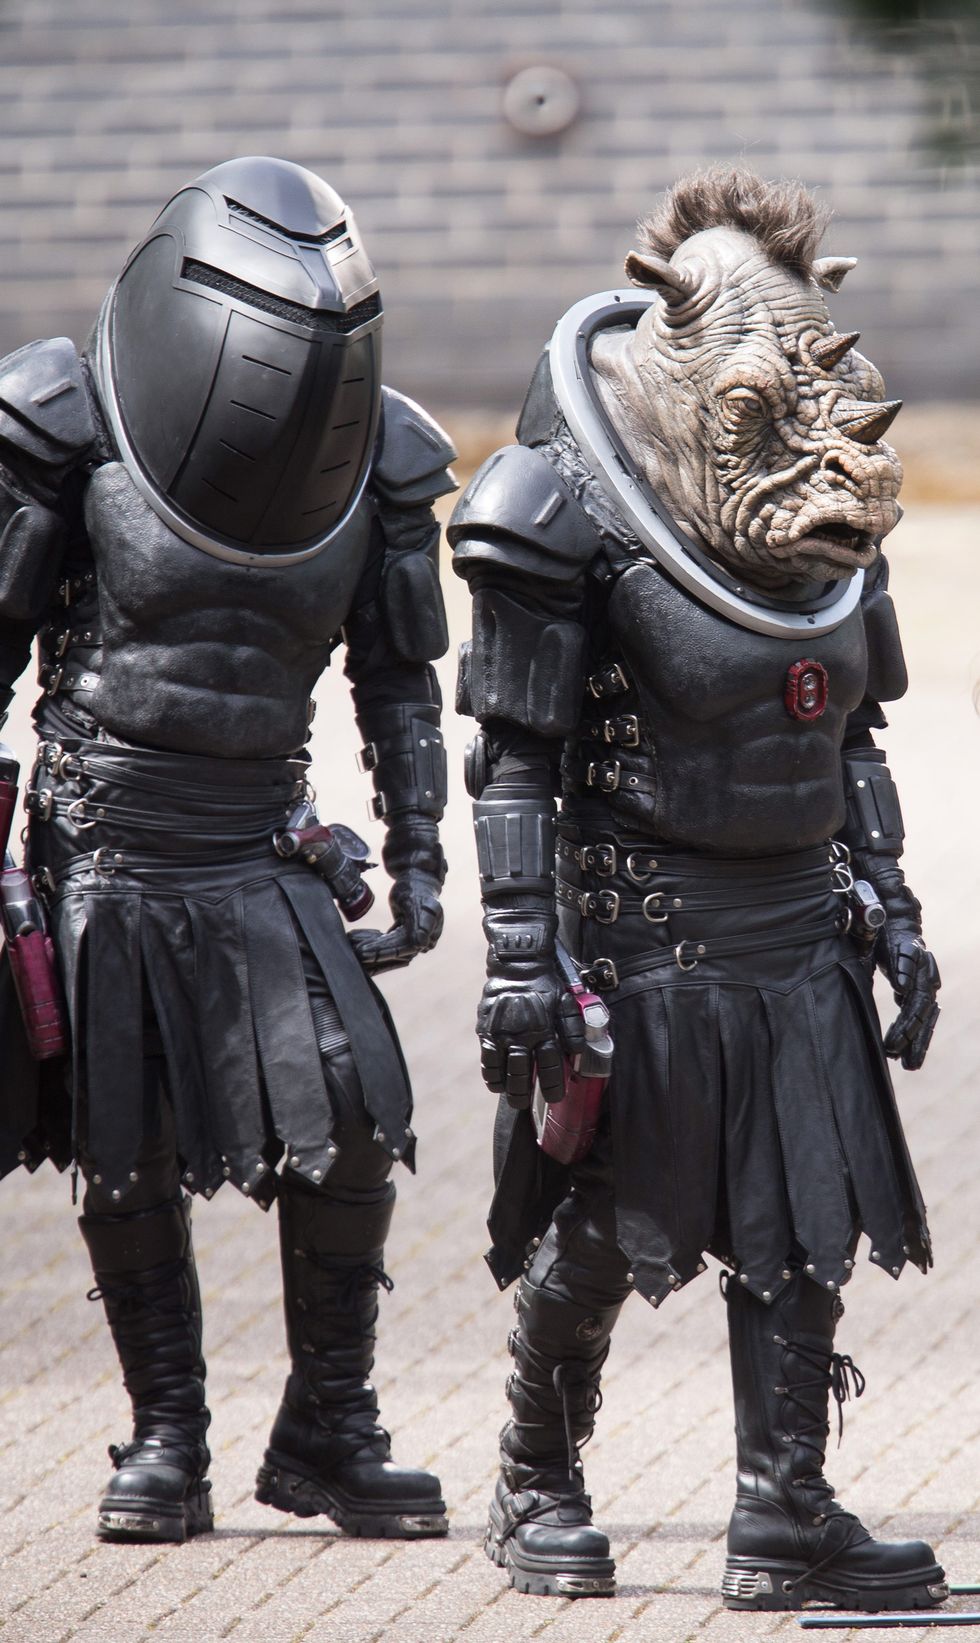 Judoon characters filming with Jodie Whittaker Doctor Who in Cardiff